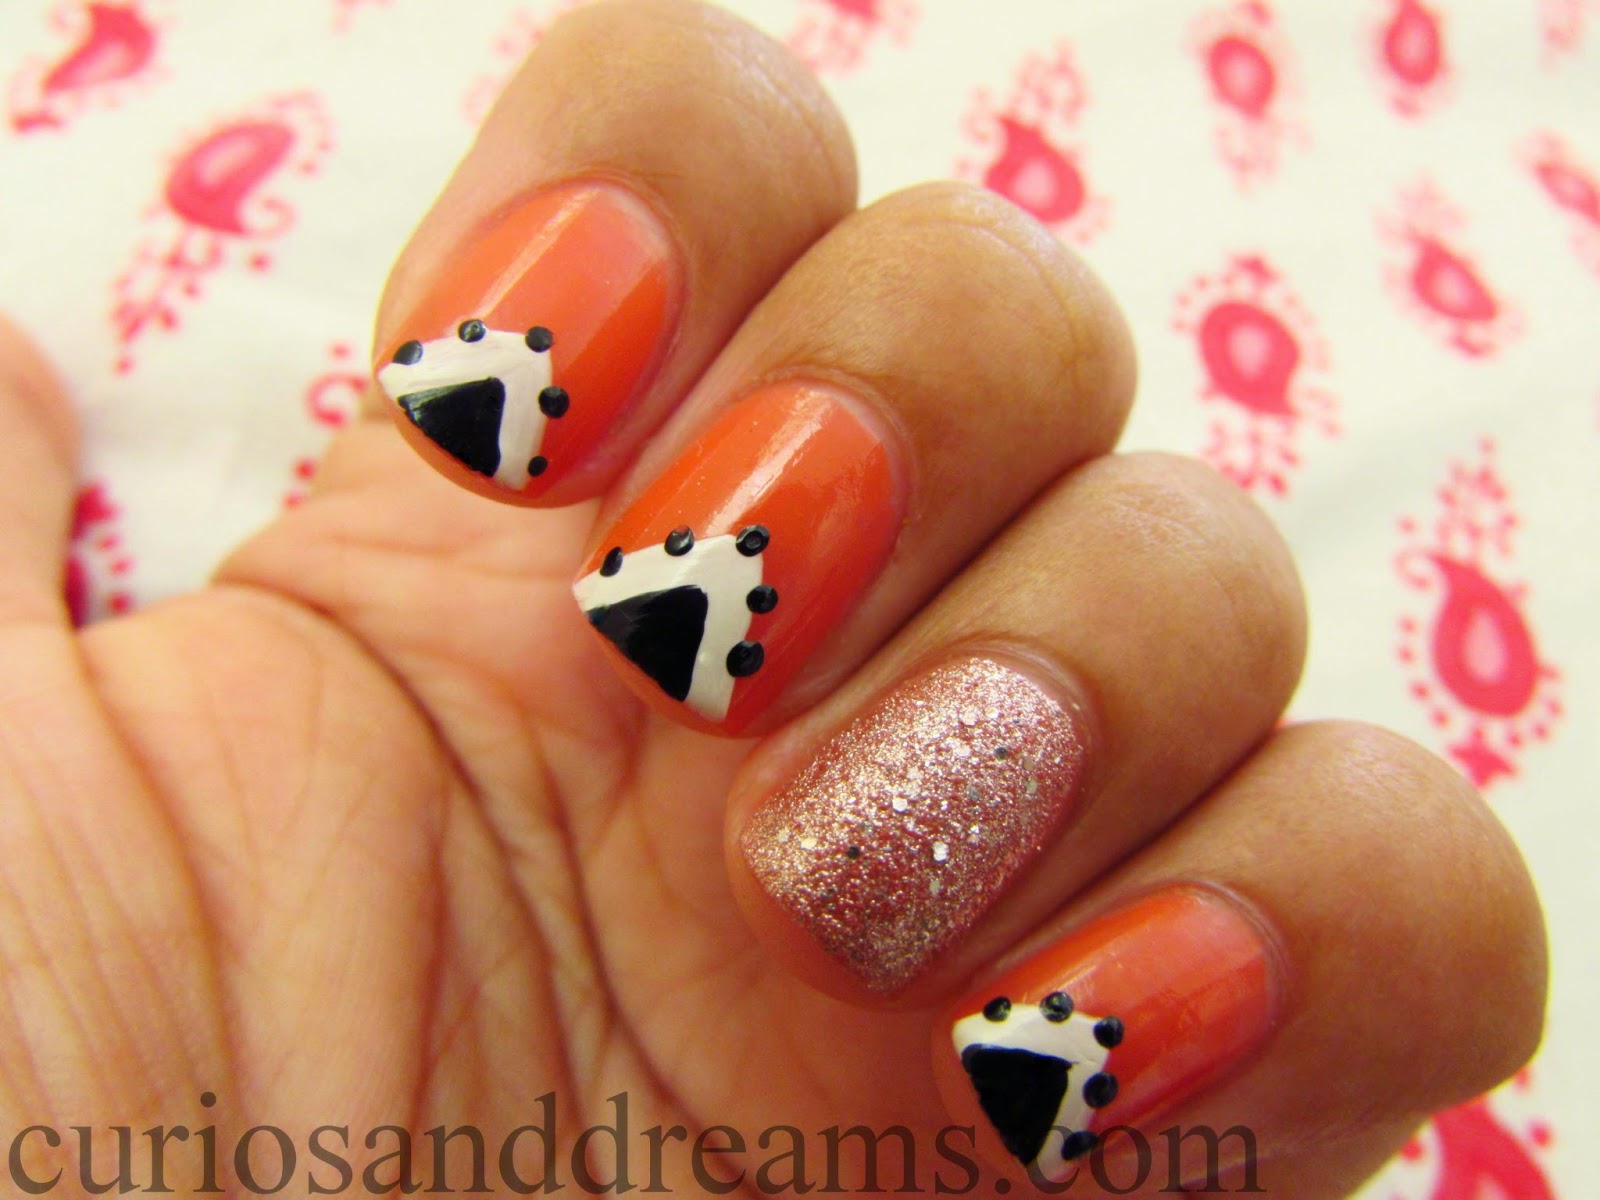 The 5 Minute Nail Art, since I was bored :D - Curios and Dreams ...